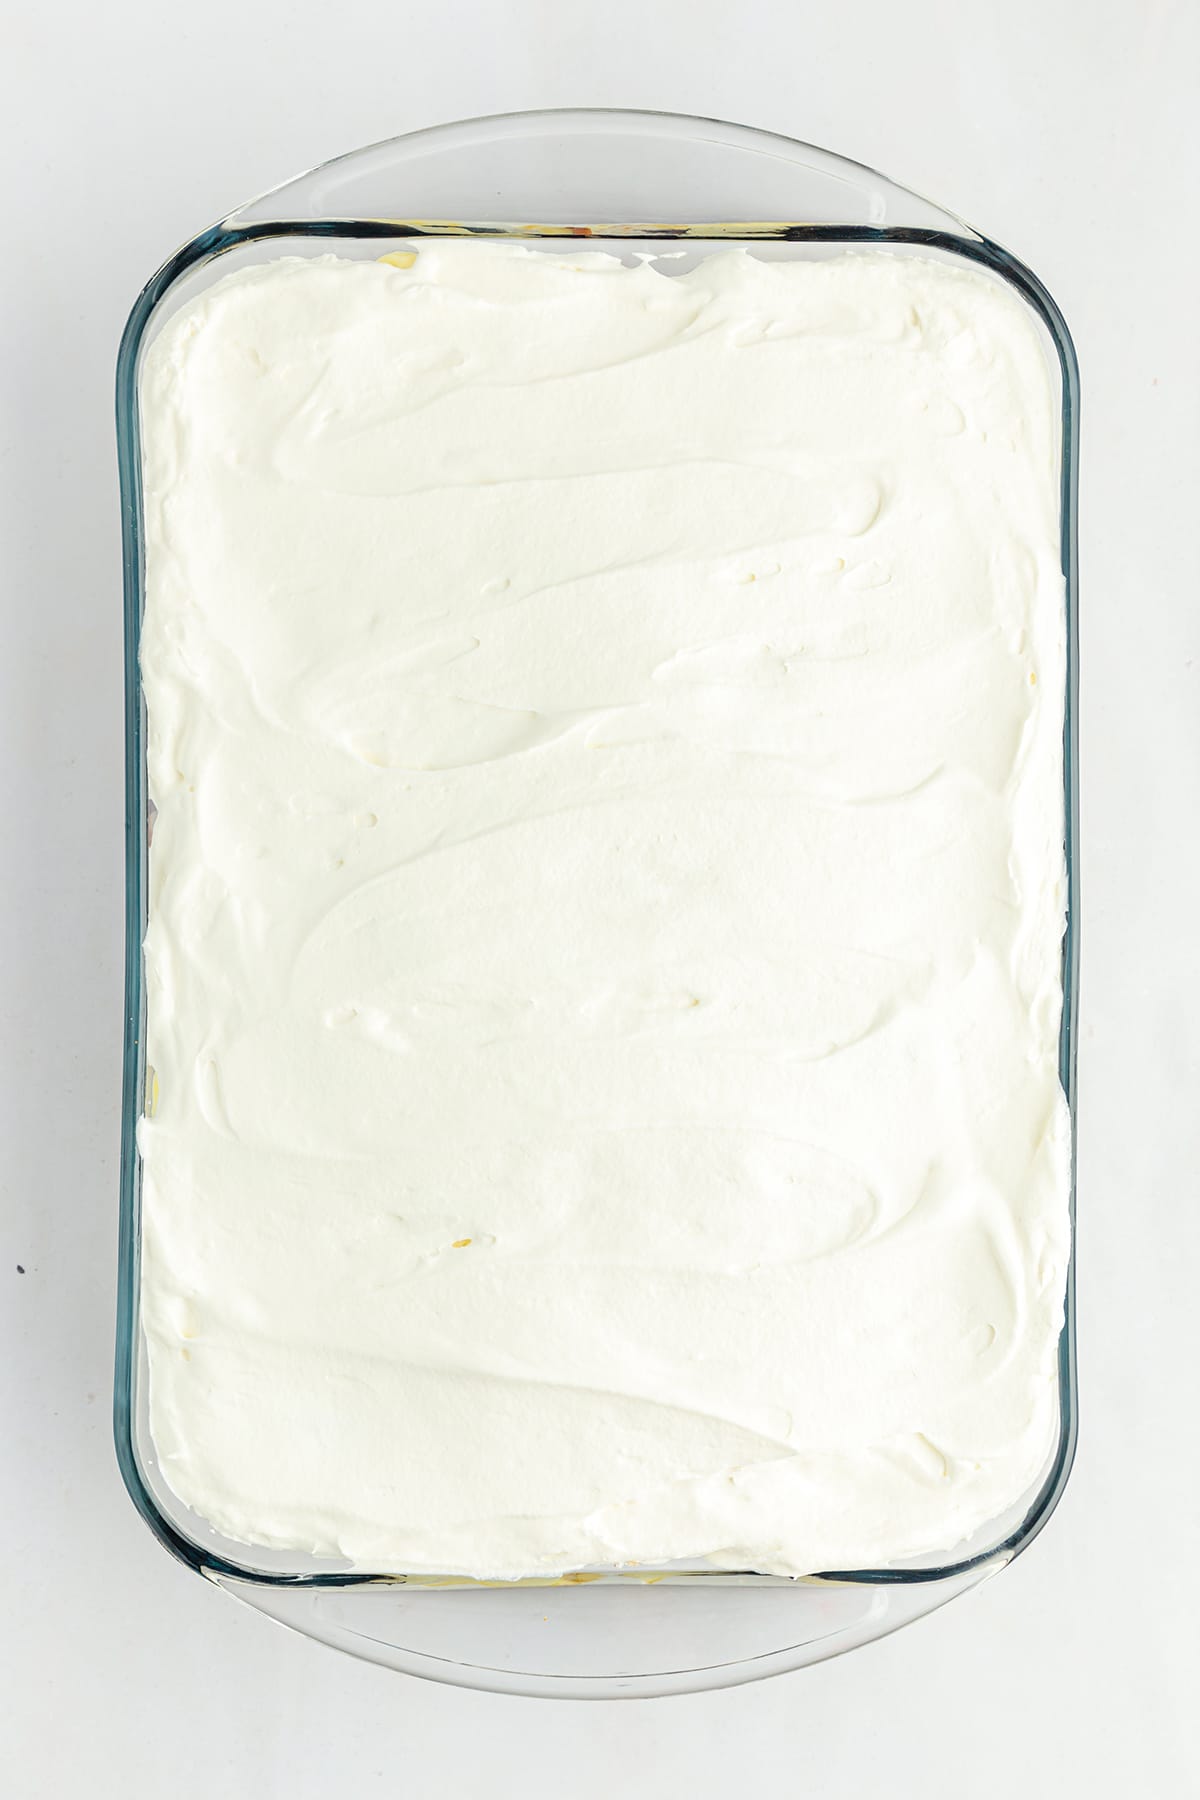 additional layer of well distributed whipped cream on the pan